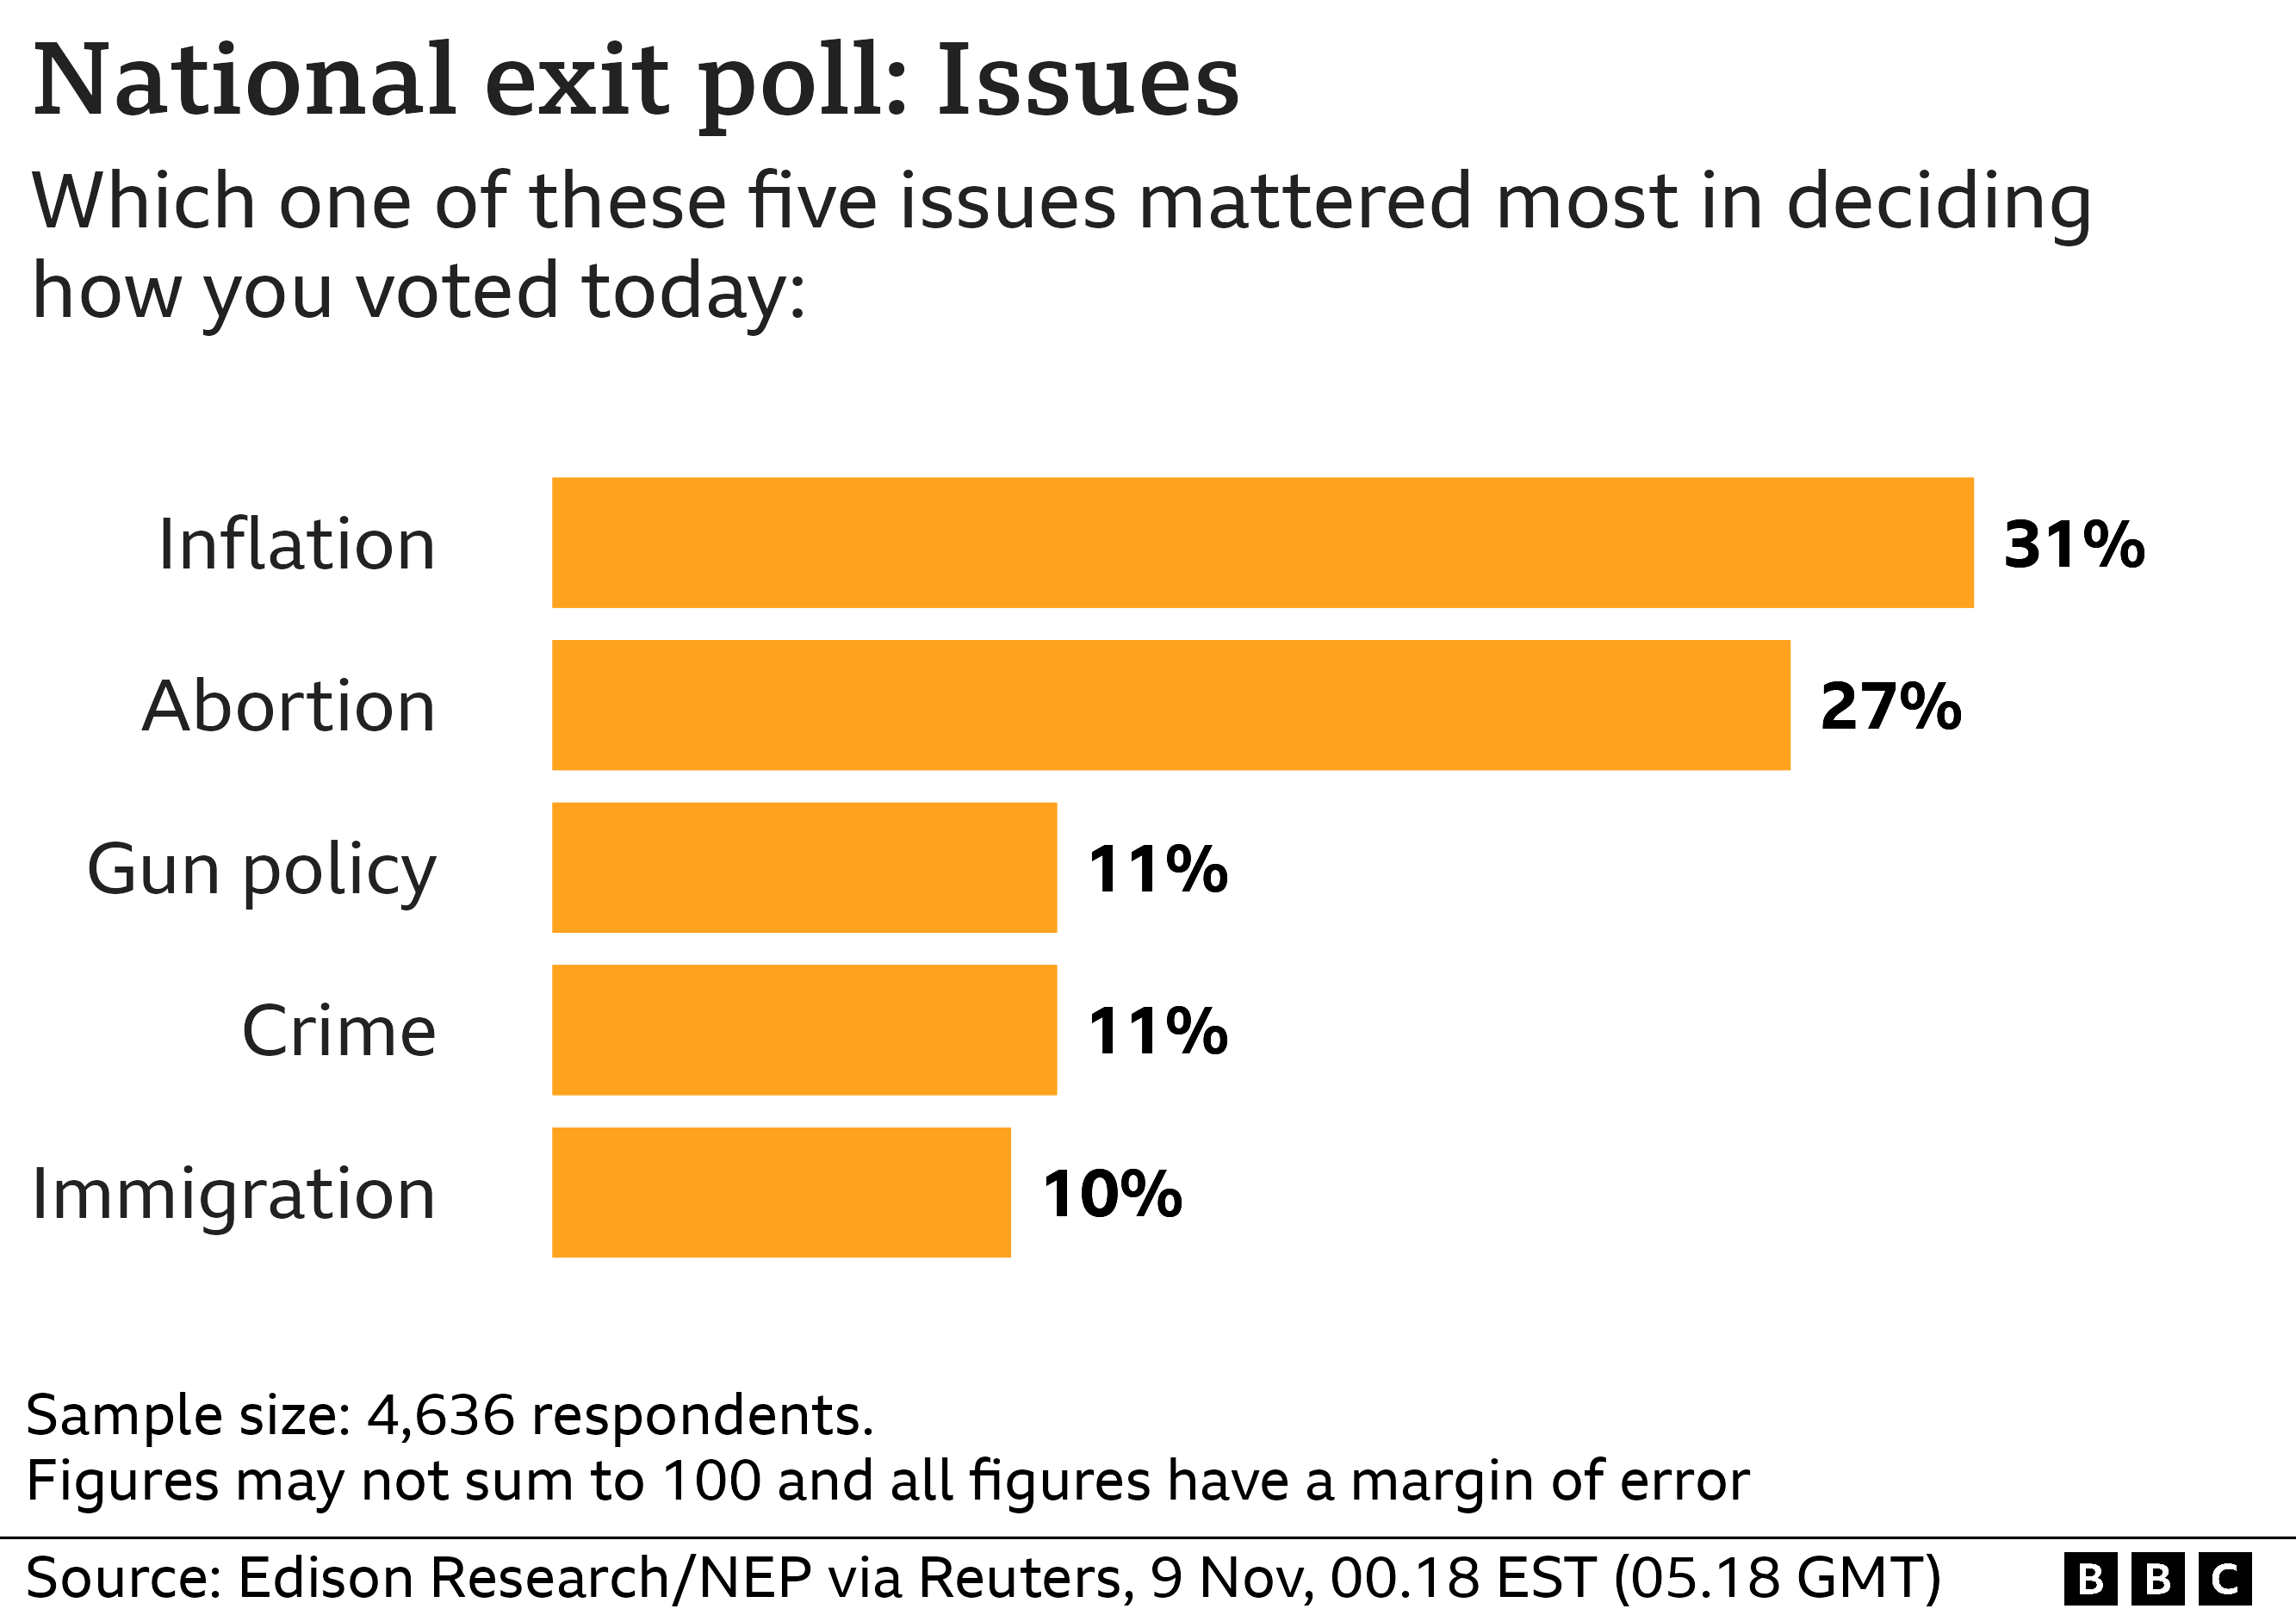 Exit poll chart: Which of these five issues mattered most in deciding how you voted today? Inflation: 31%, Abortion: 27%, Gun policy: 11%, Crime: 11%, Immigration: 10%